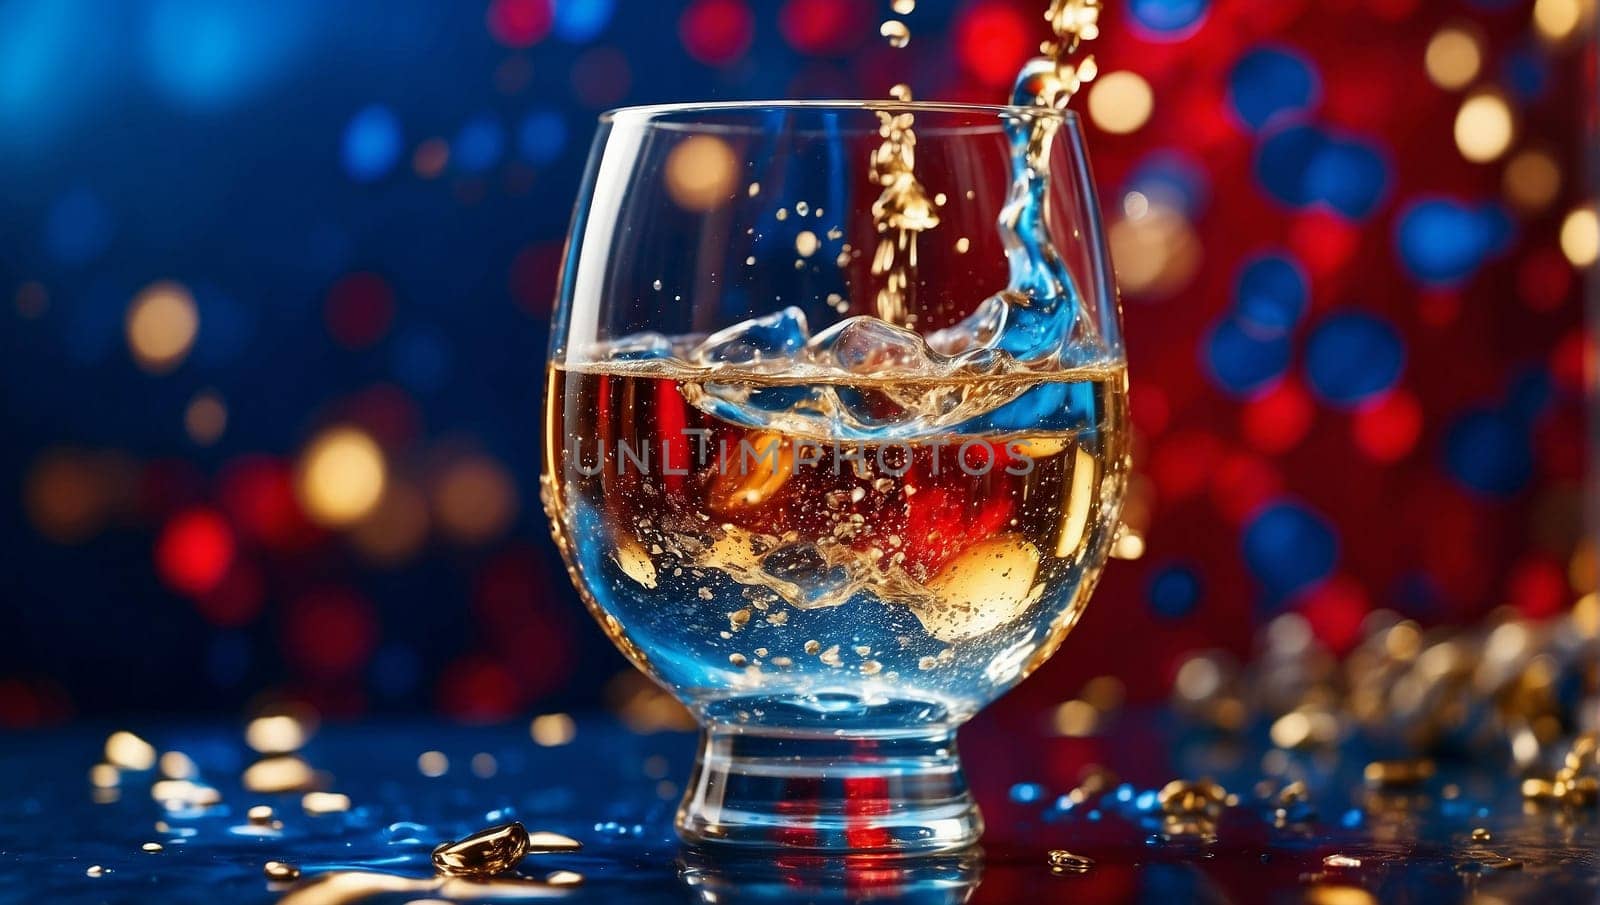 Champagne splashing from a Christmas glass on a dark red and blue magical background by Севостьянов